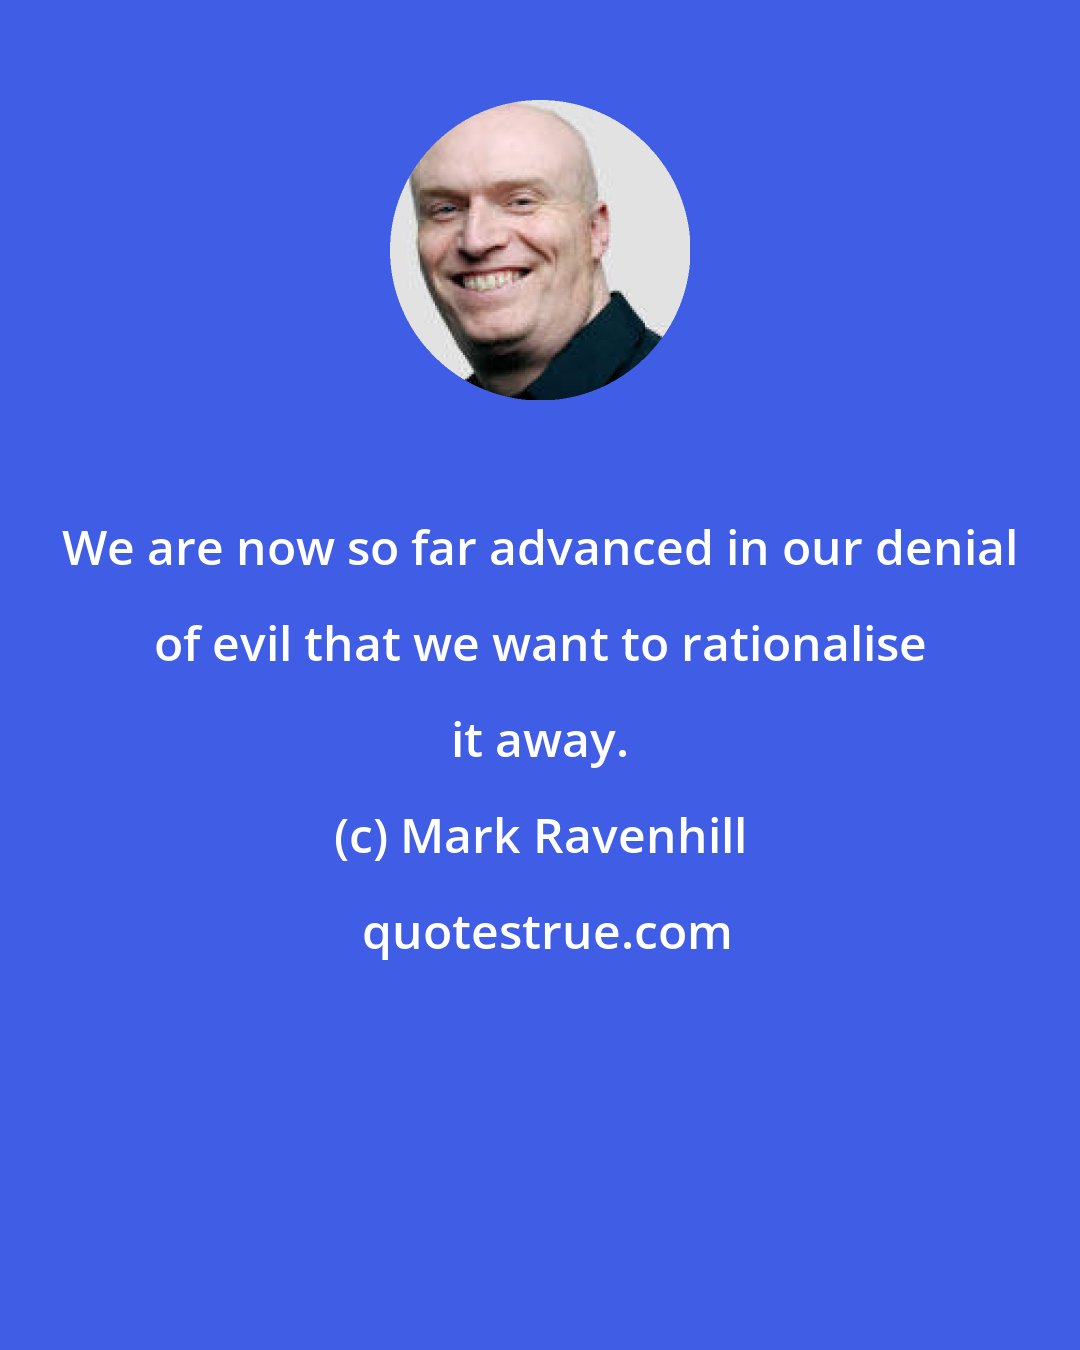 Mark Ravenhill: We are now so far advanced in our denial of evil that we want to rationalise it away.